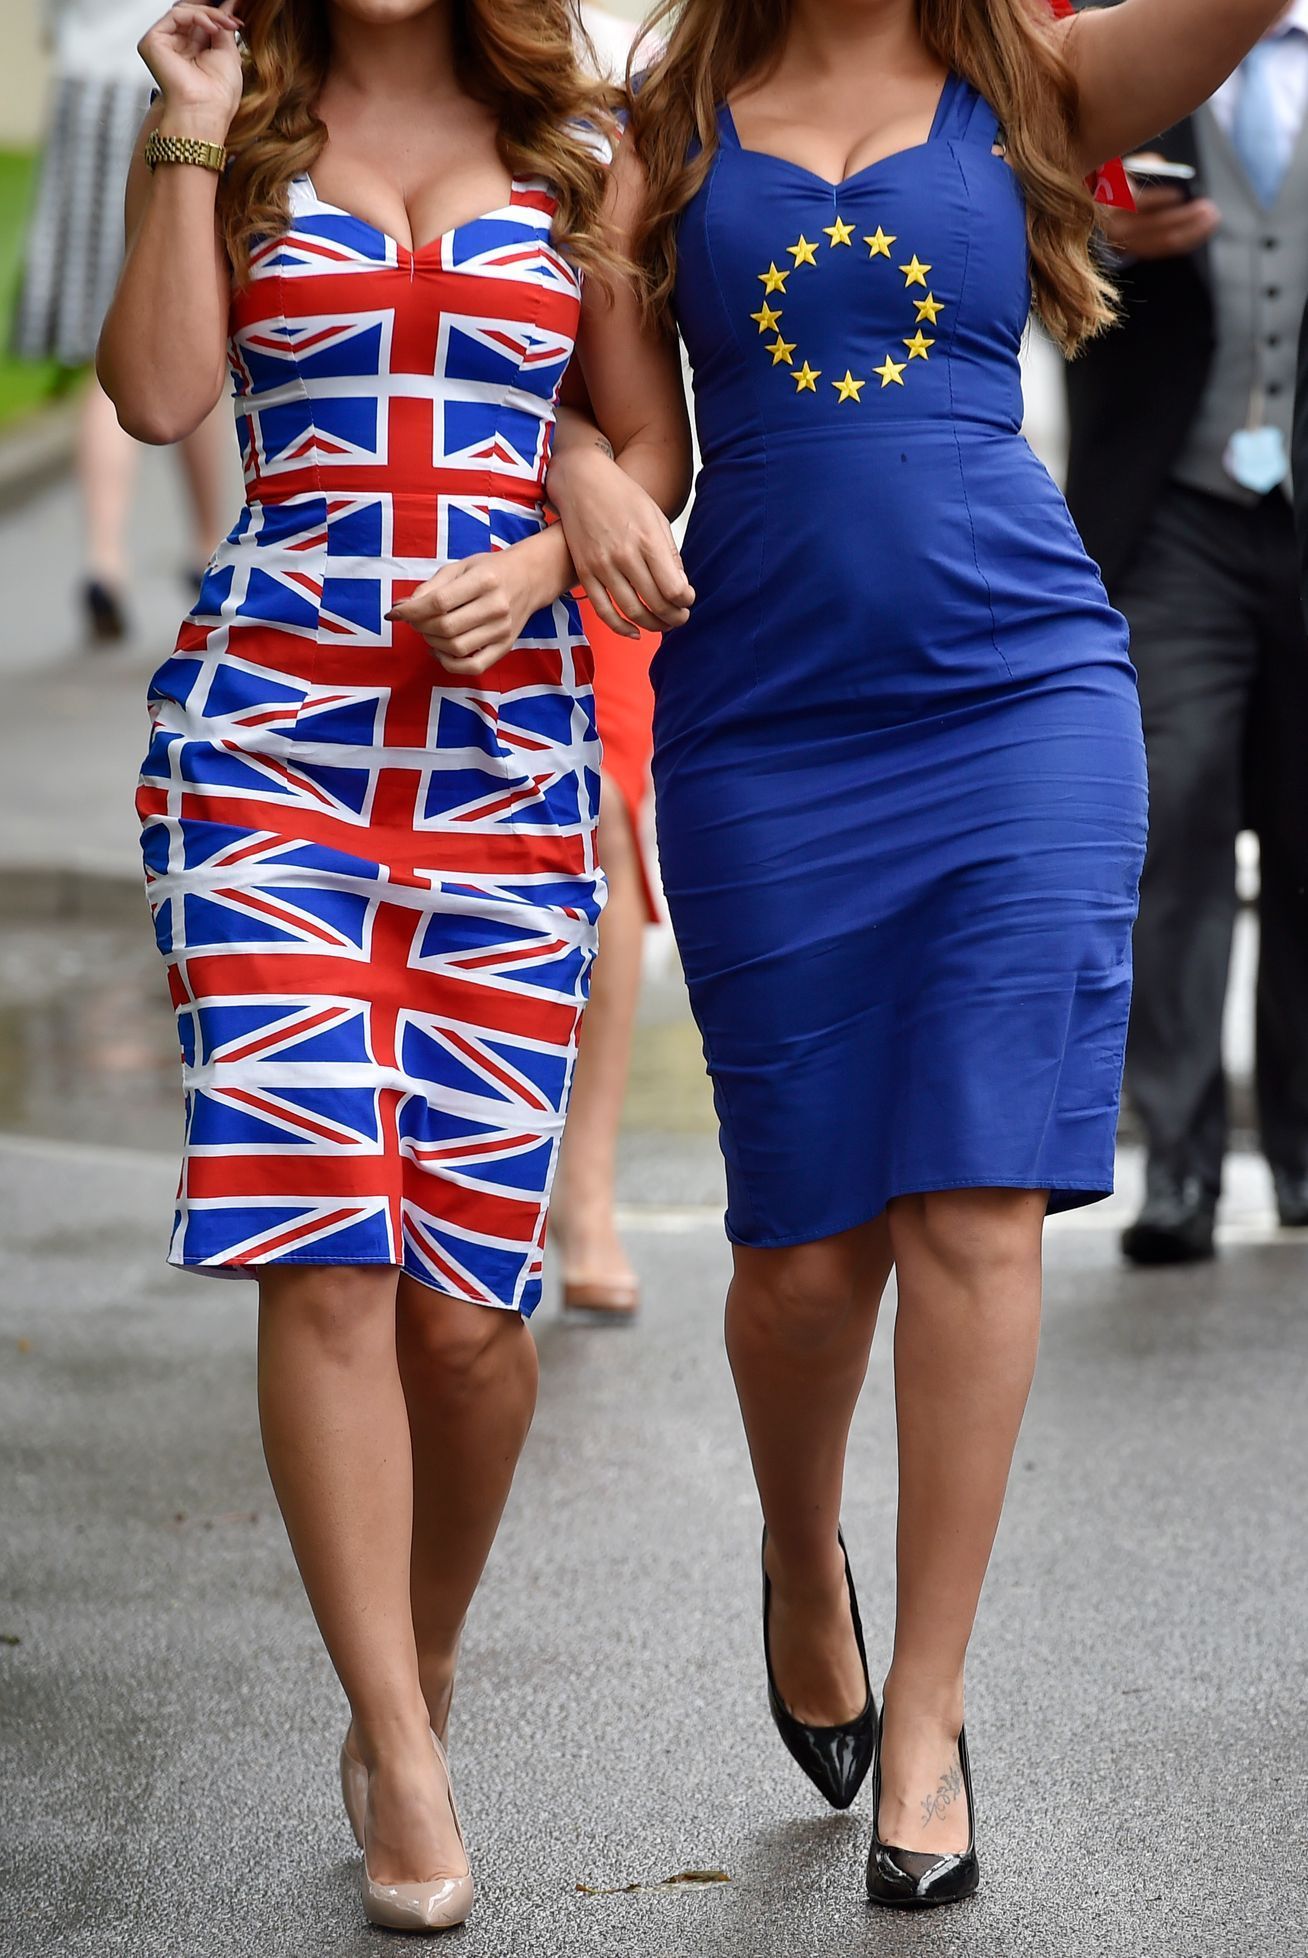 Brexit General view of racegoers in Britain and EU referendum themed dresses